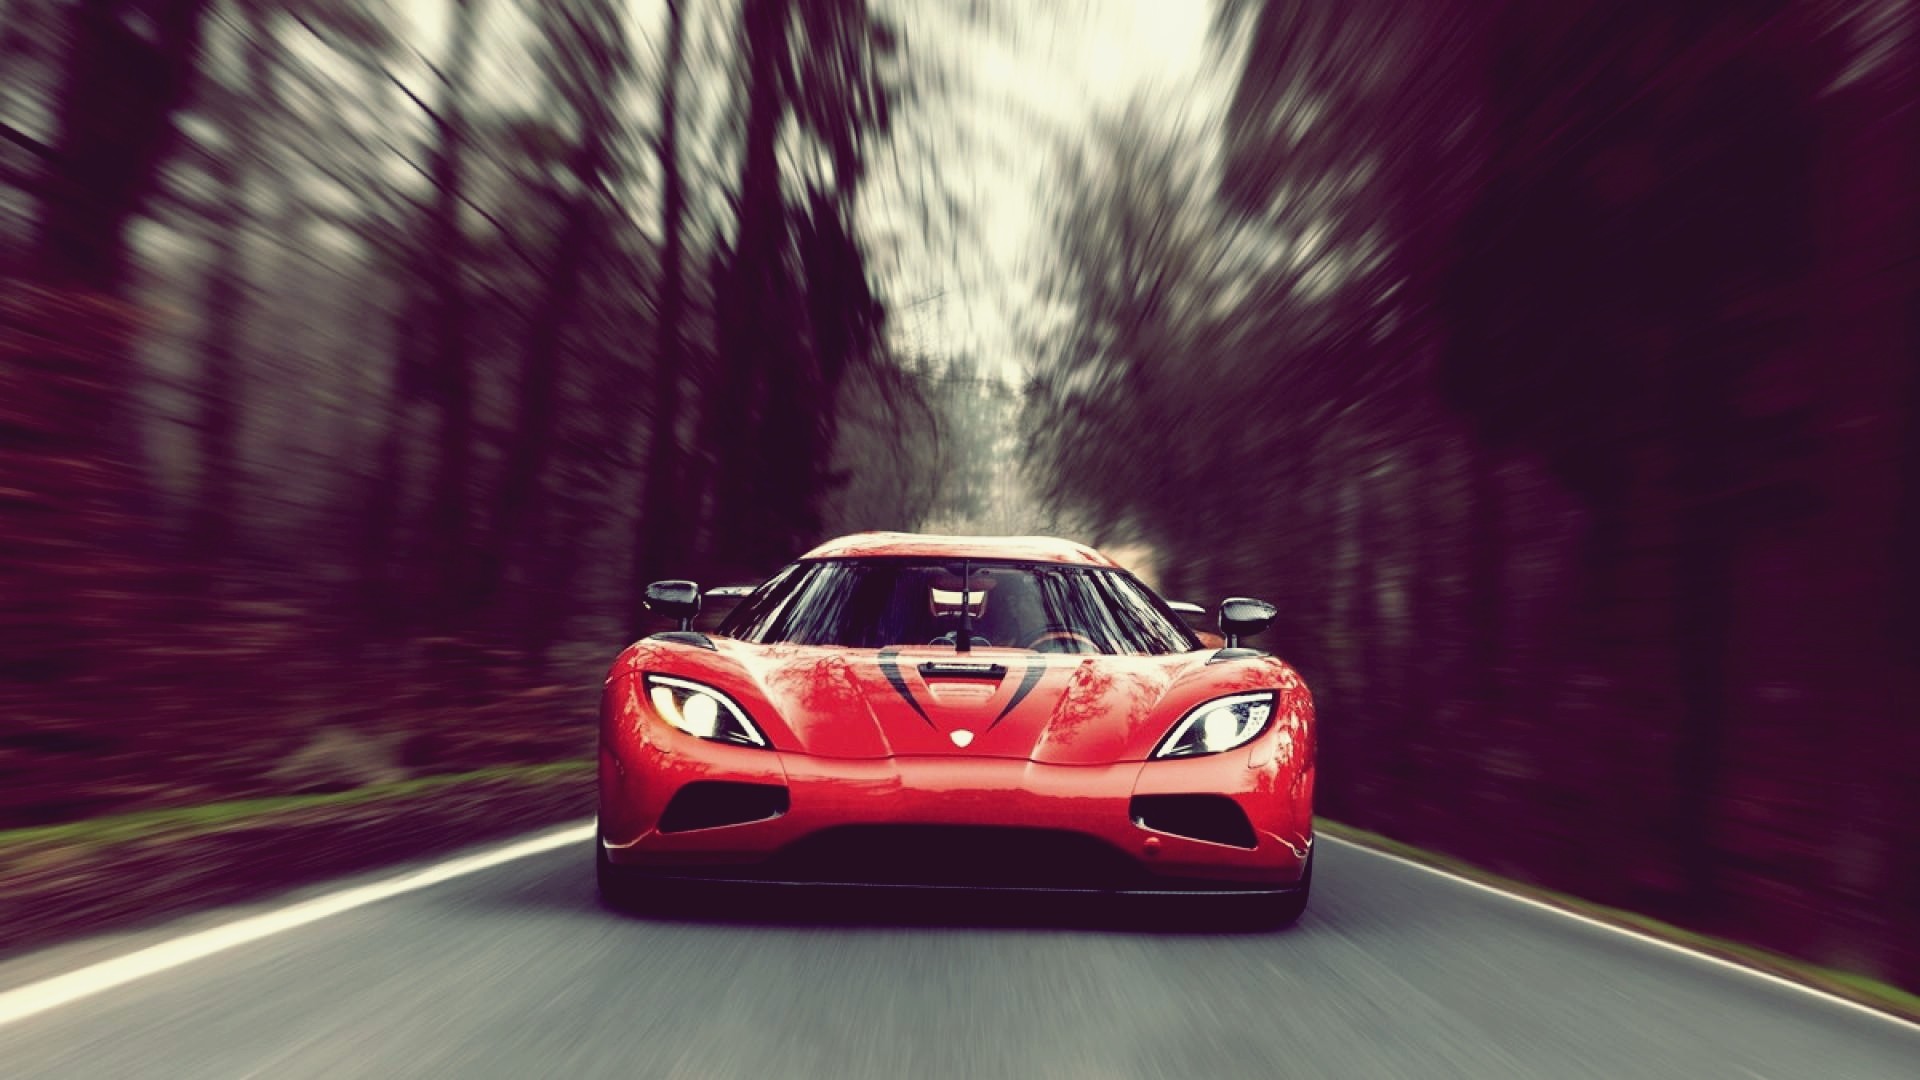 X koenigsegg agera x resolution hd k wallpapers images backgrounds photos and pictures